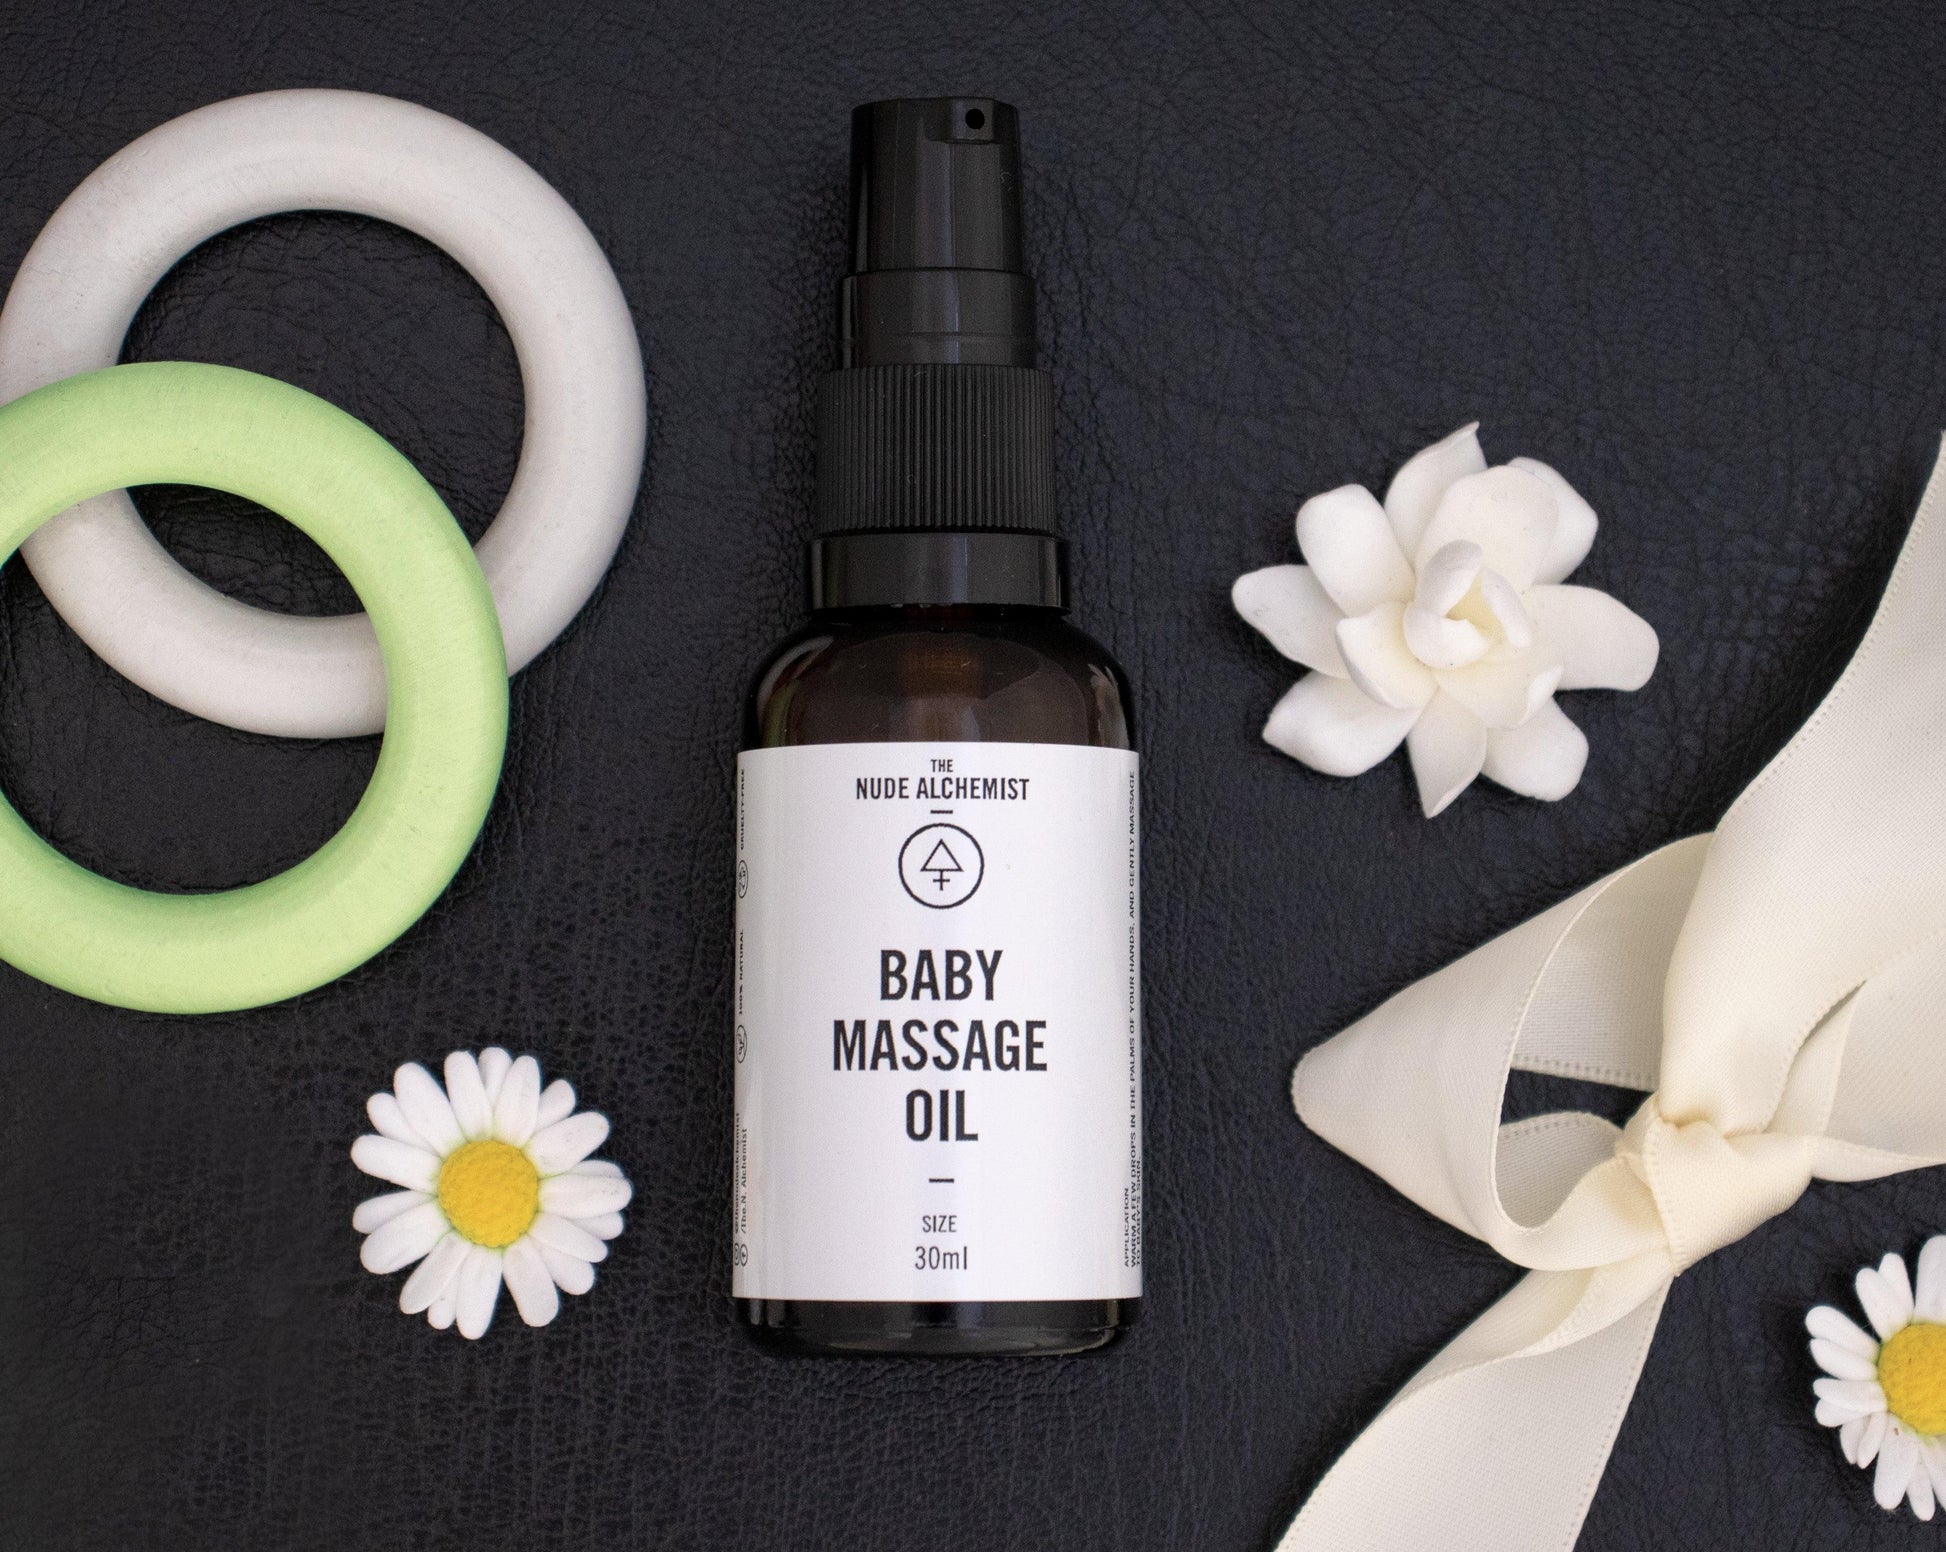 Yoho Baby & co. The Nude Alchemist Baby Massage Oil perfect for nourishing babies delicate skin